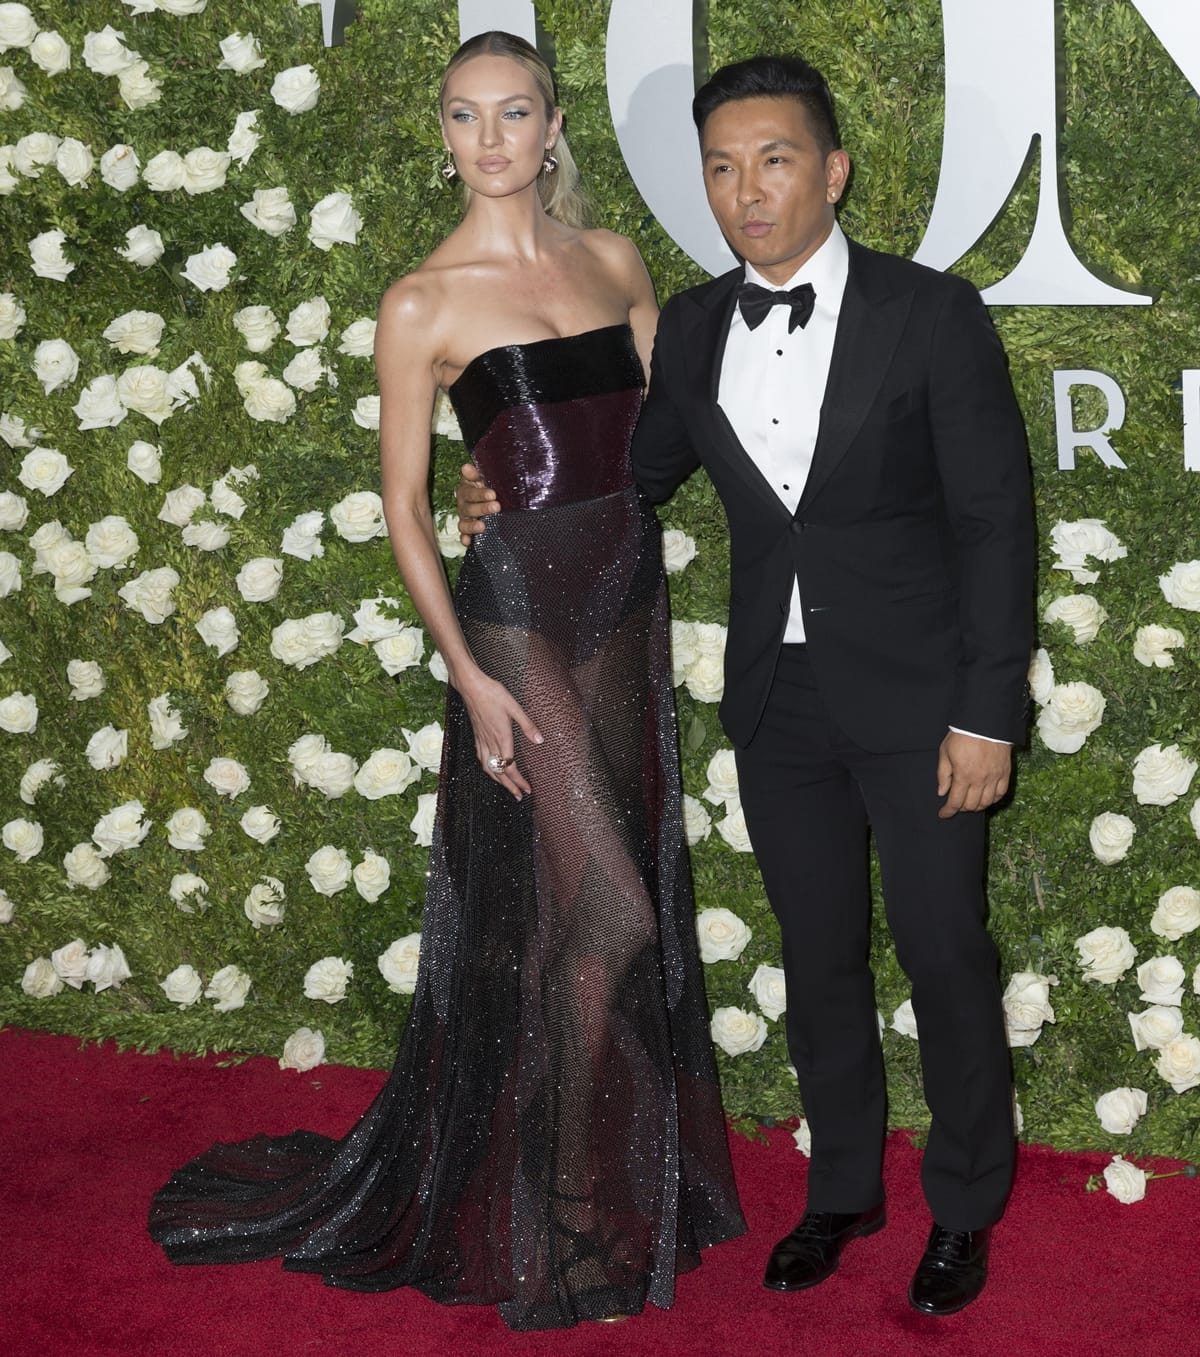 Candice Swanepoel in Prabal Gurung posing with the fashion designer at the Tony Awards